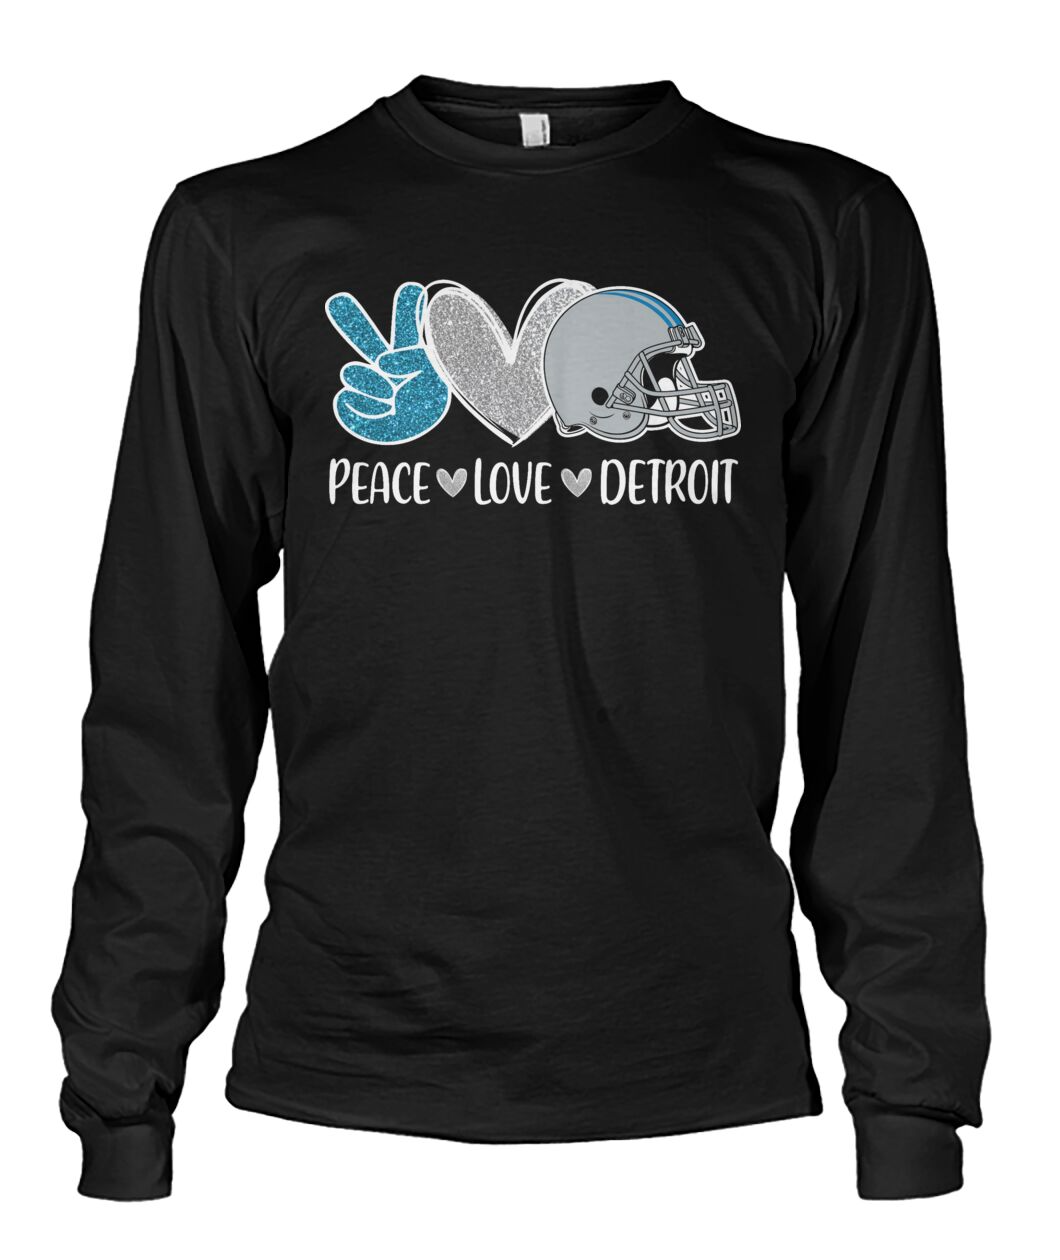 Detroit American Football Peace Silver Blue Long Sleeve Shirt, Perfect Outfit For Men Women Family Love Detroit Football Sport Lovers